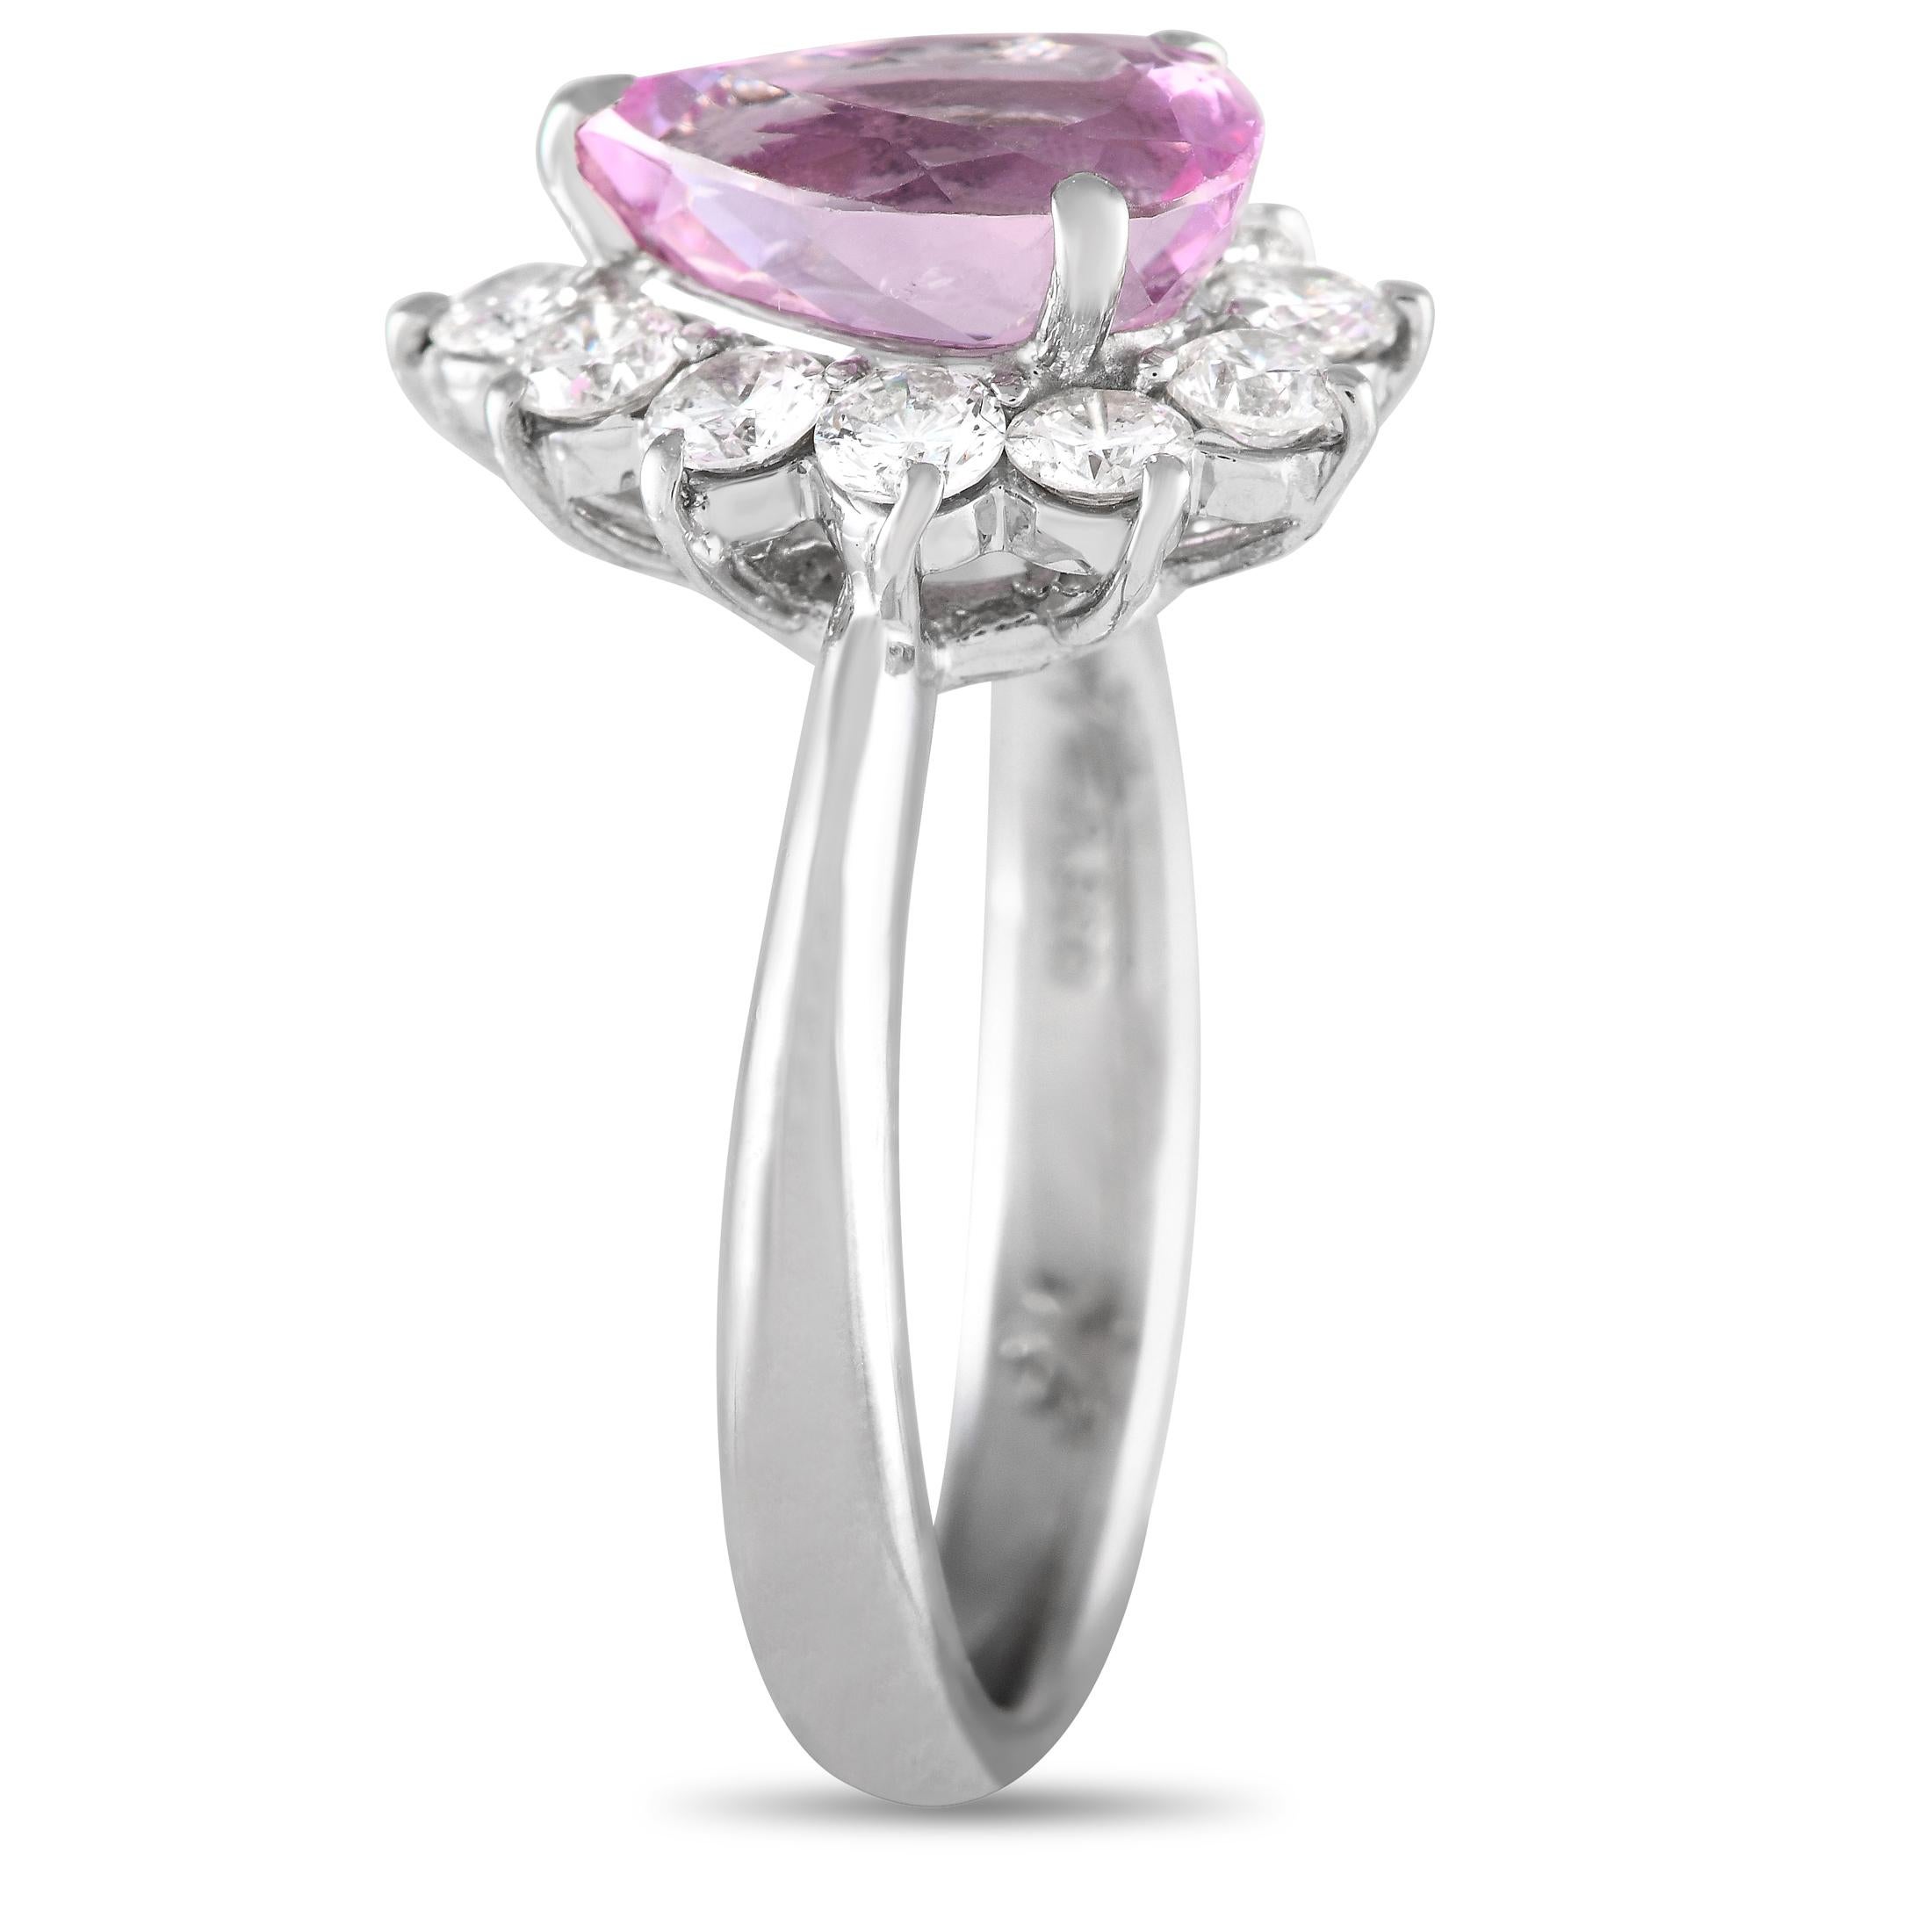 Ideal for everyday elegance, this platinum ring has the perfect amount of sparkle and color to spruce up your looks. It features a platinum band with an eye-catching 2.07 ct pear-cut pink zircon. The pink zircon's impressive fire is complemented by